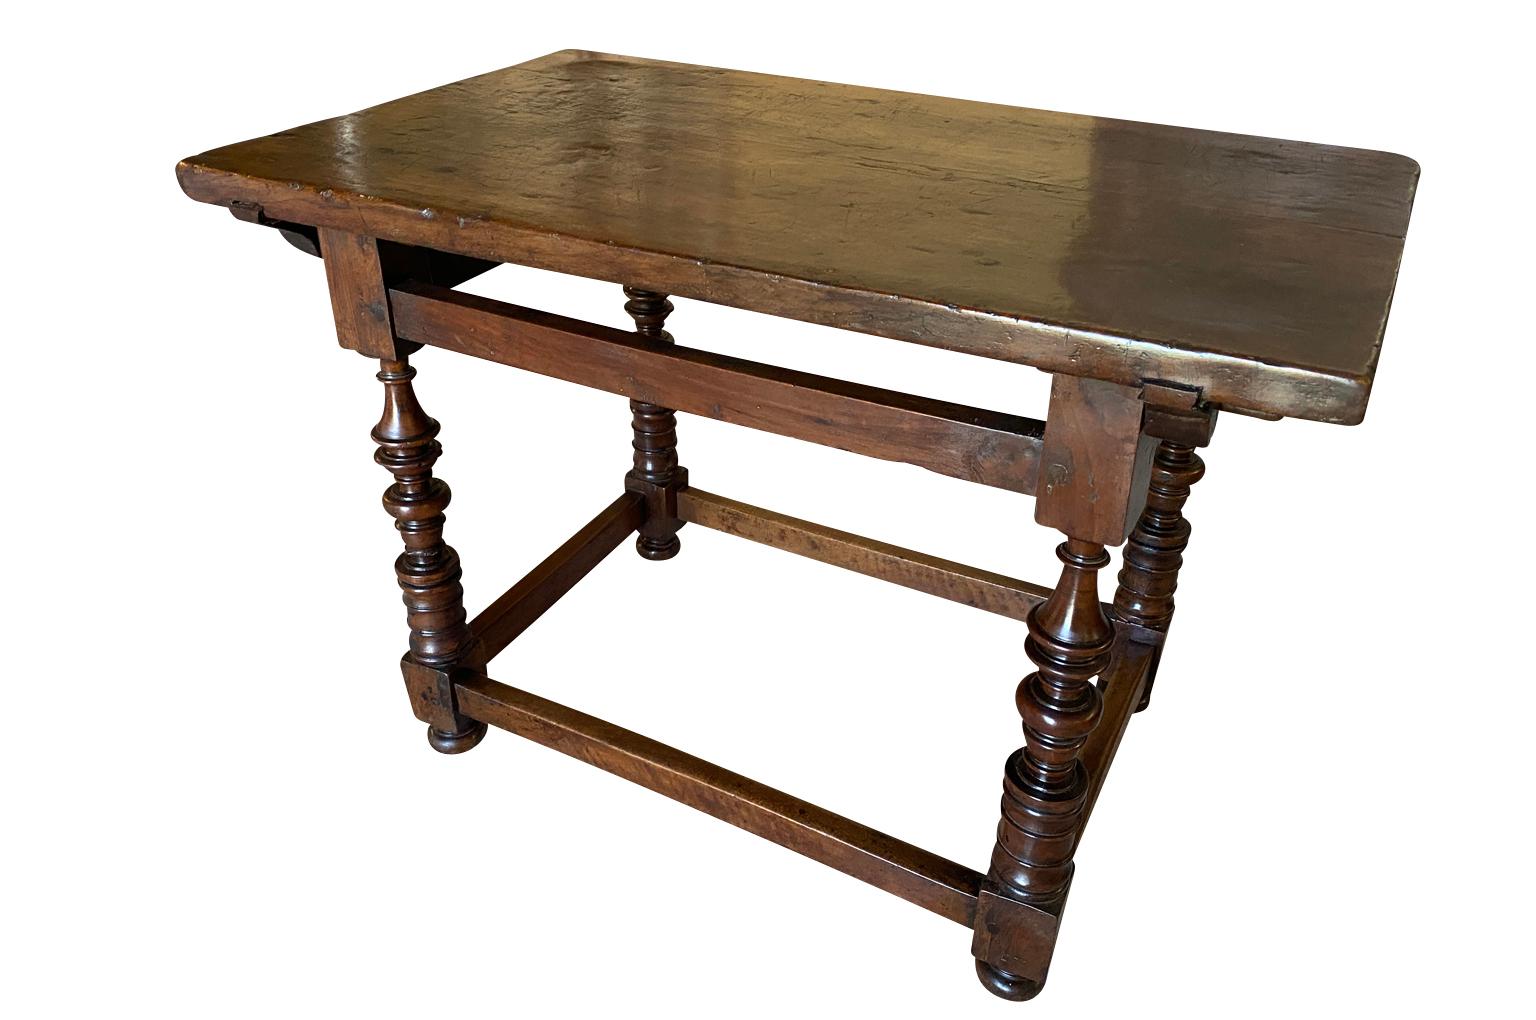 A sensational 17th century Side Table from the Tuscan region of Italy. Beautifully constructed from sumptuous walnut with solid board top and Rocchetto style legs. Gorgeous patina.